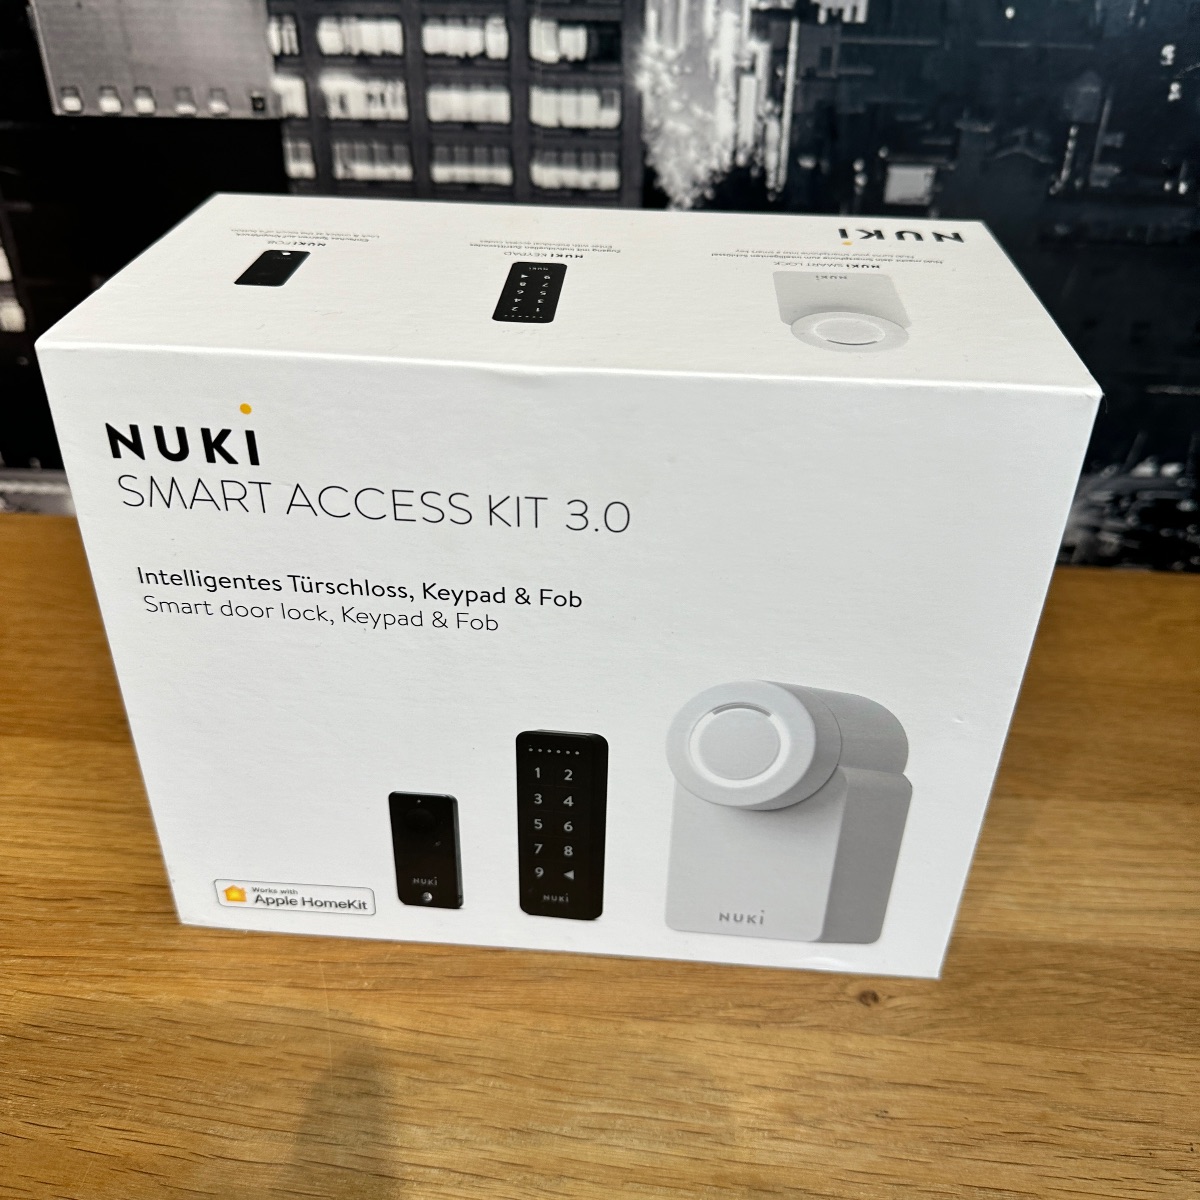 Nuki Smart Access Kit 3.0 Electronic Door Lock Works With Apple Home Kit Sealed HPXZ2ZM/A 9120072082306 (Brand New)